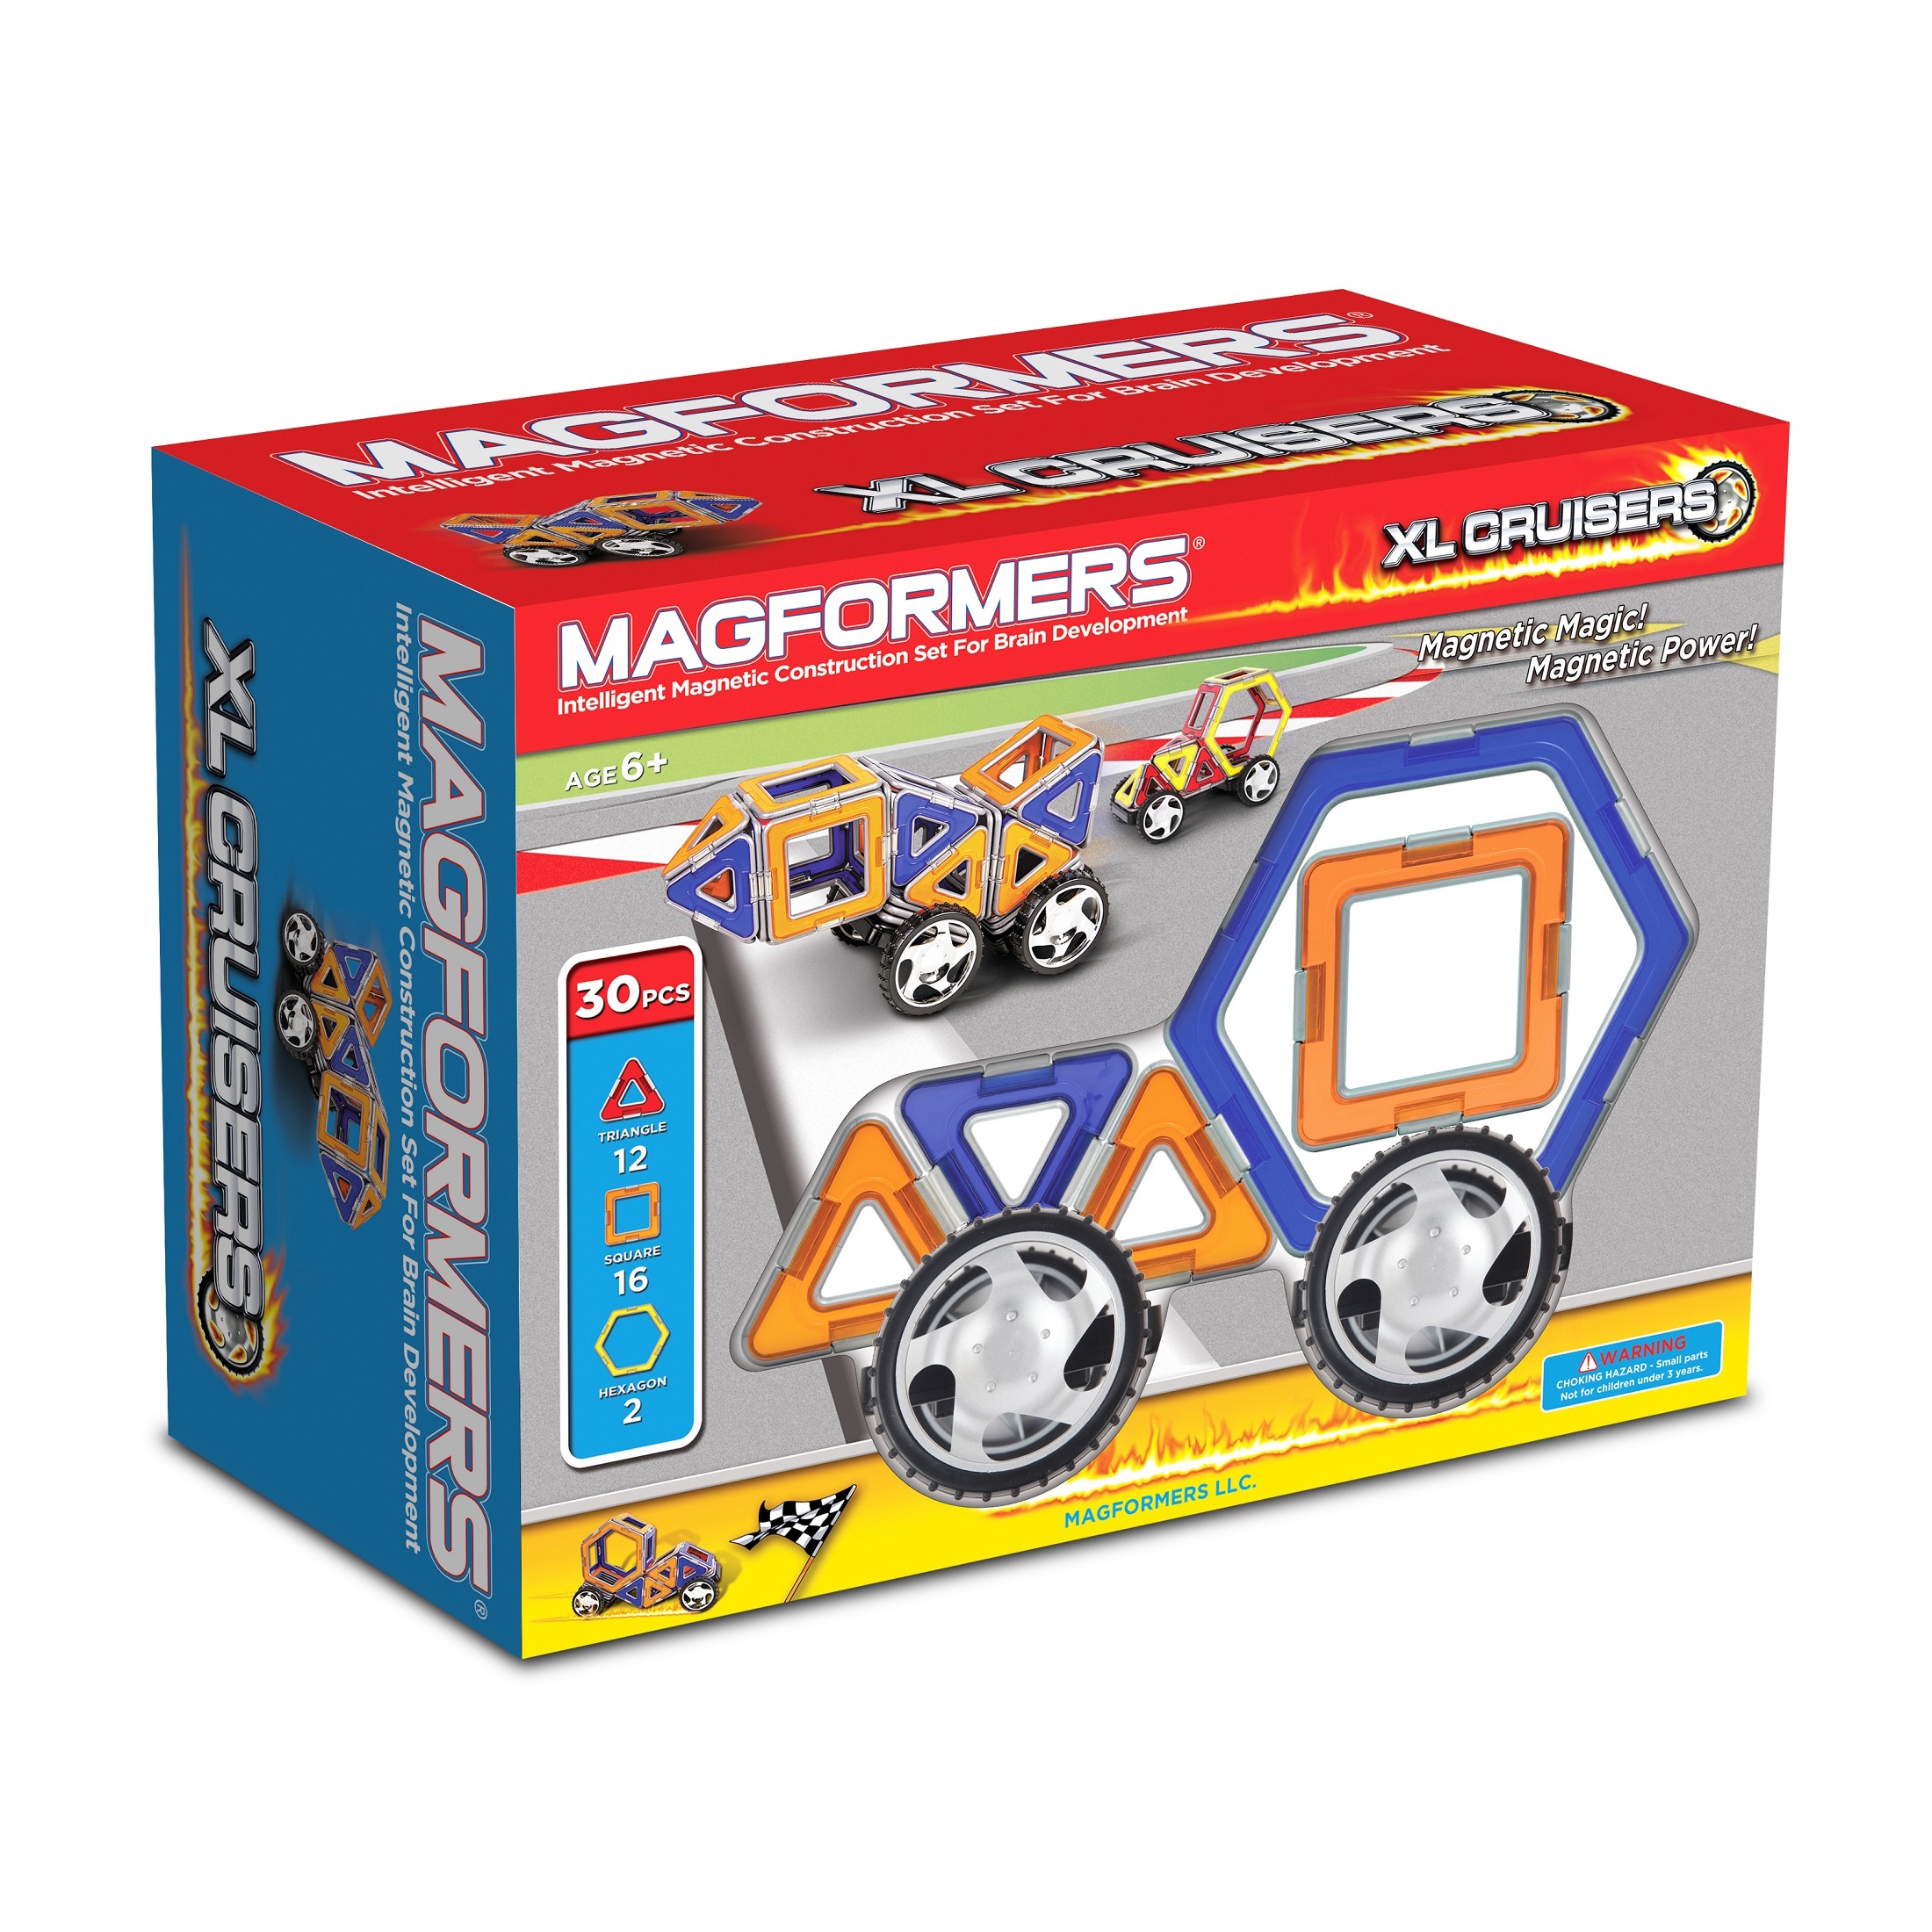 magformers xl cruisers